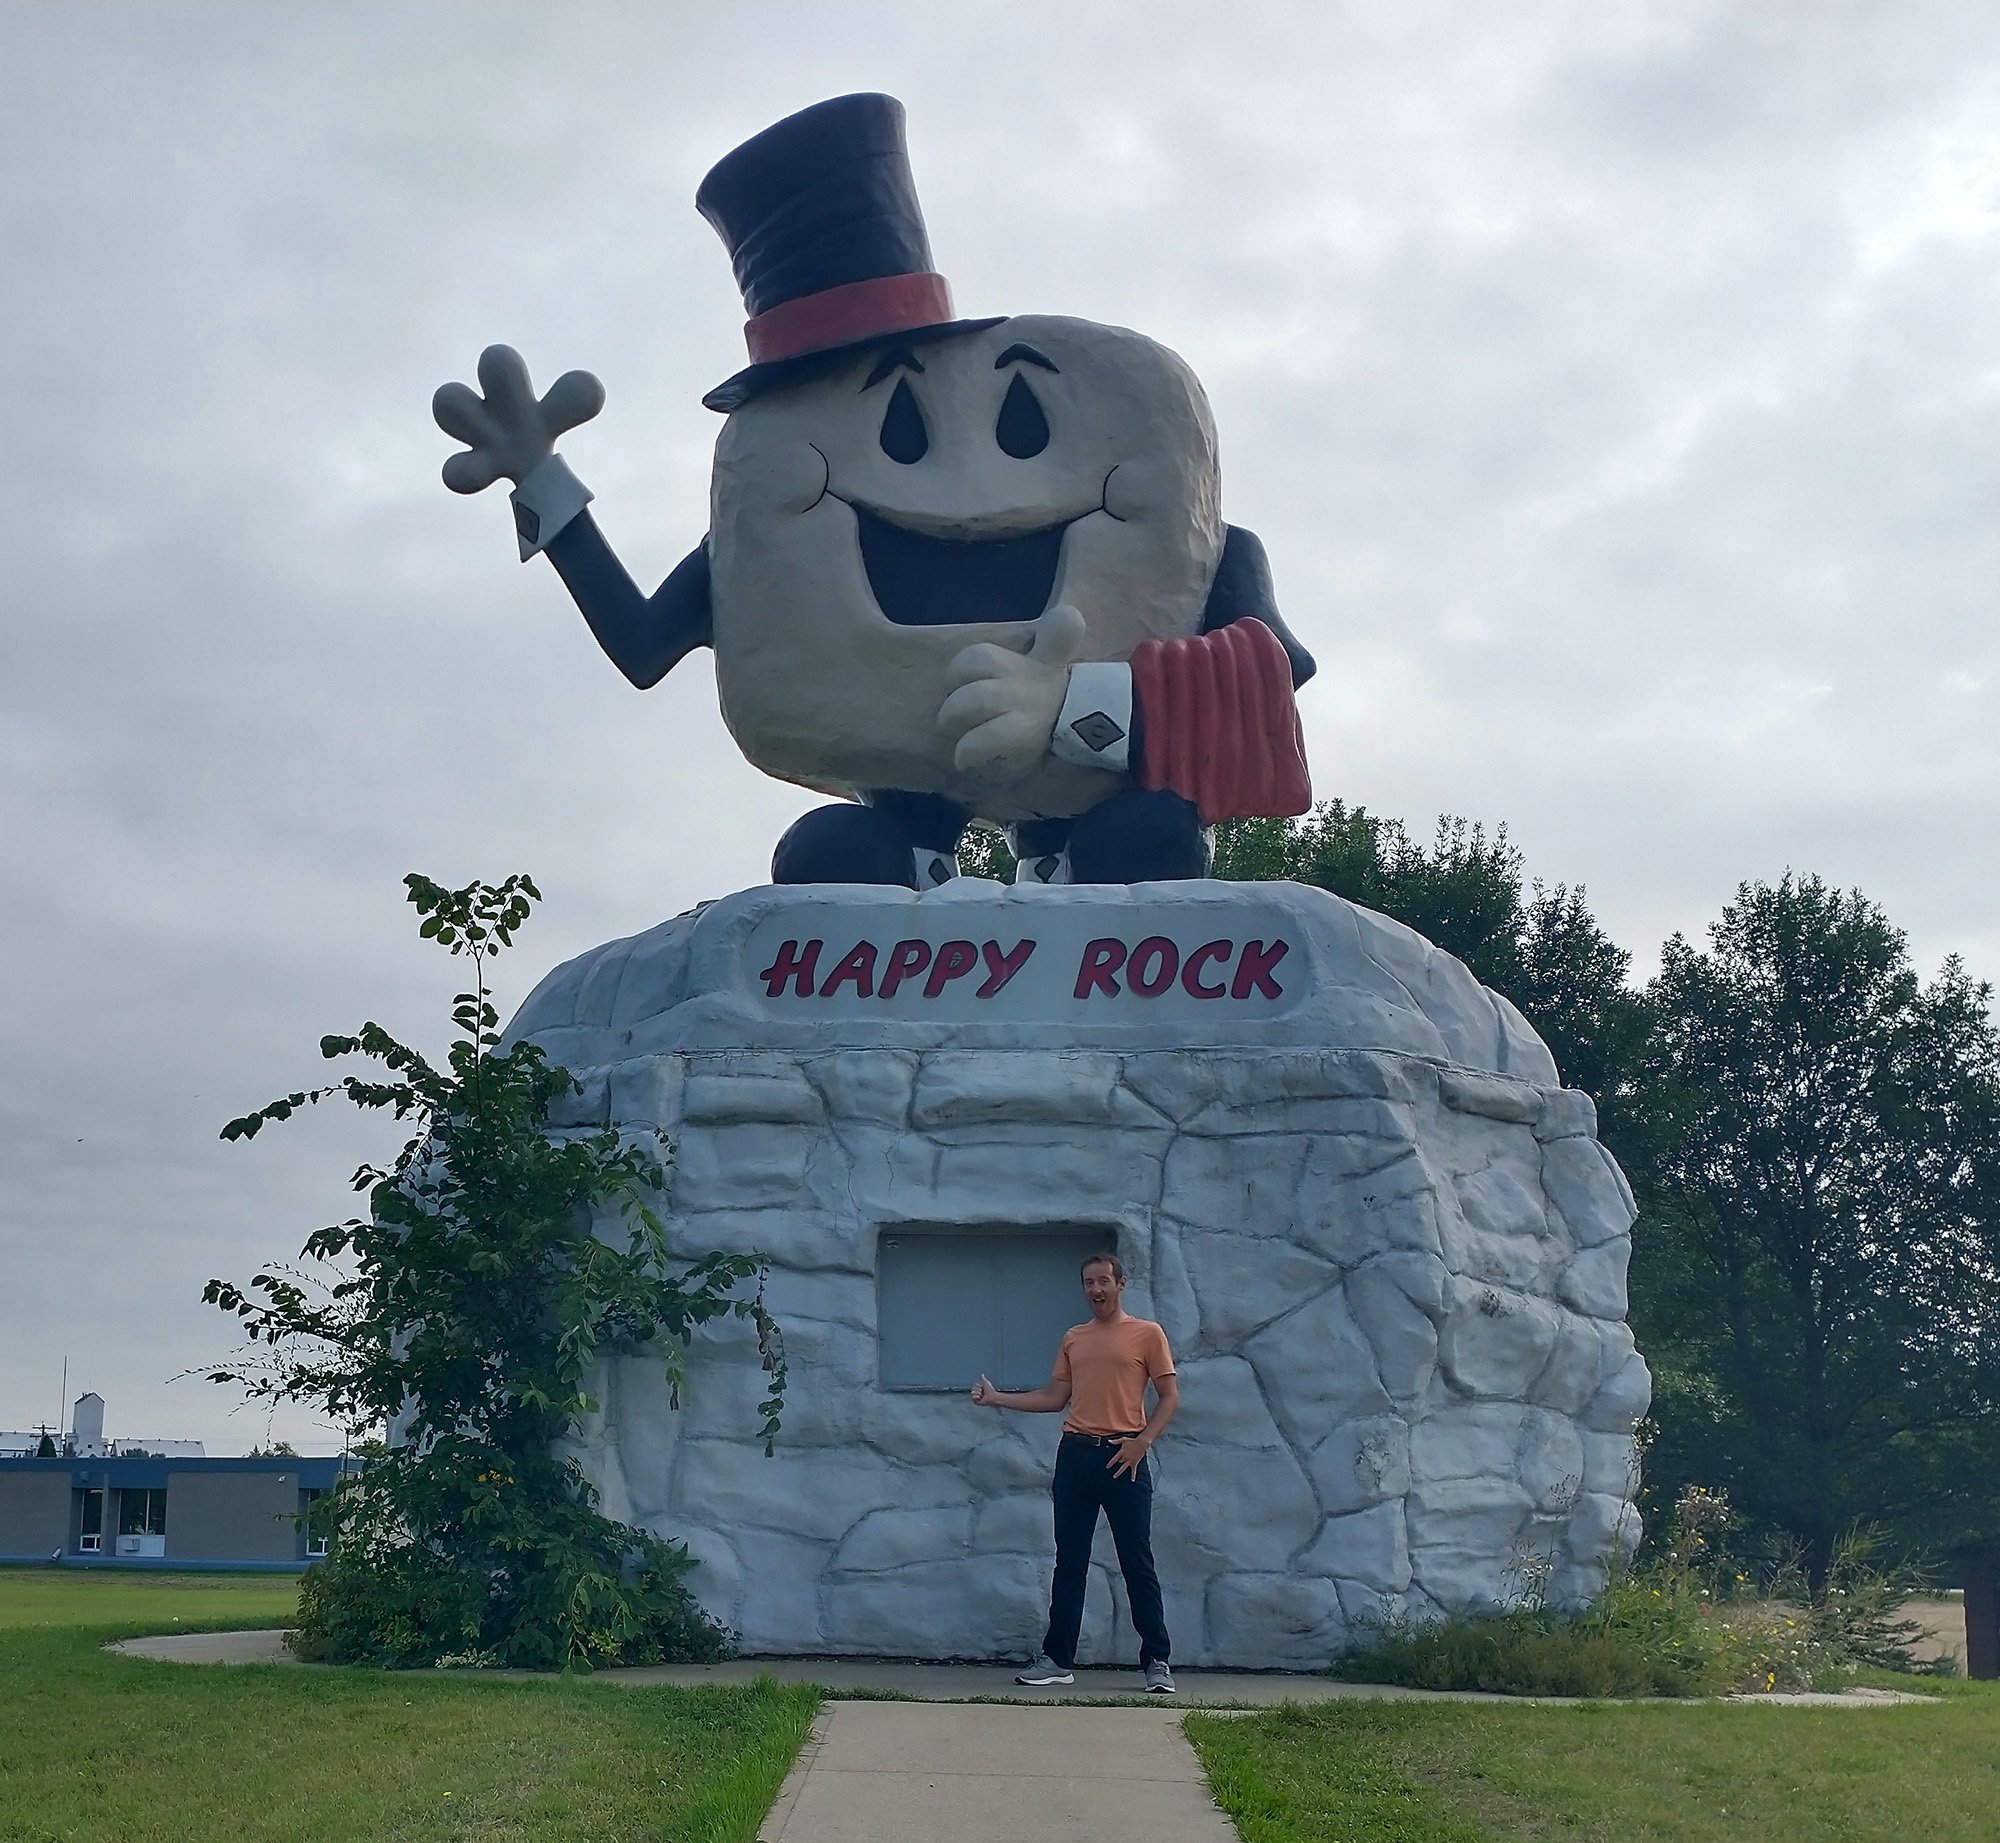 First stop: The Happy Rock, in Gladstone! How could you not stop to see this?